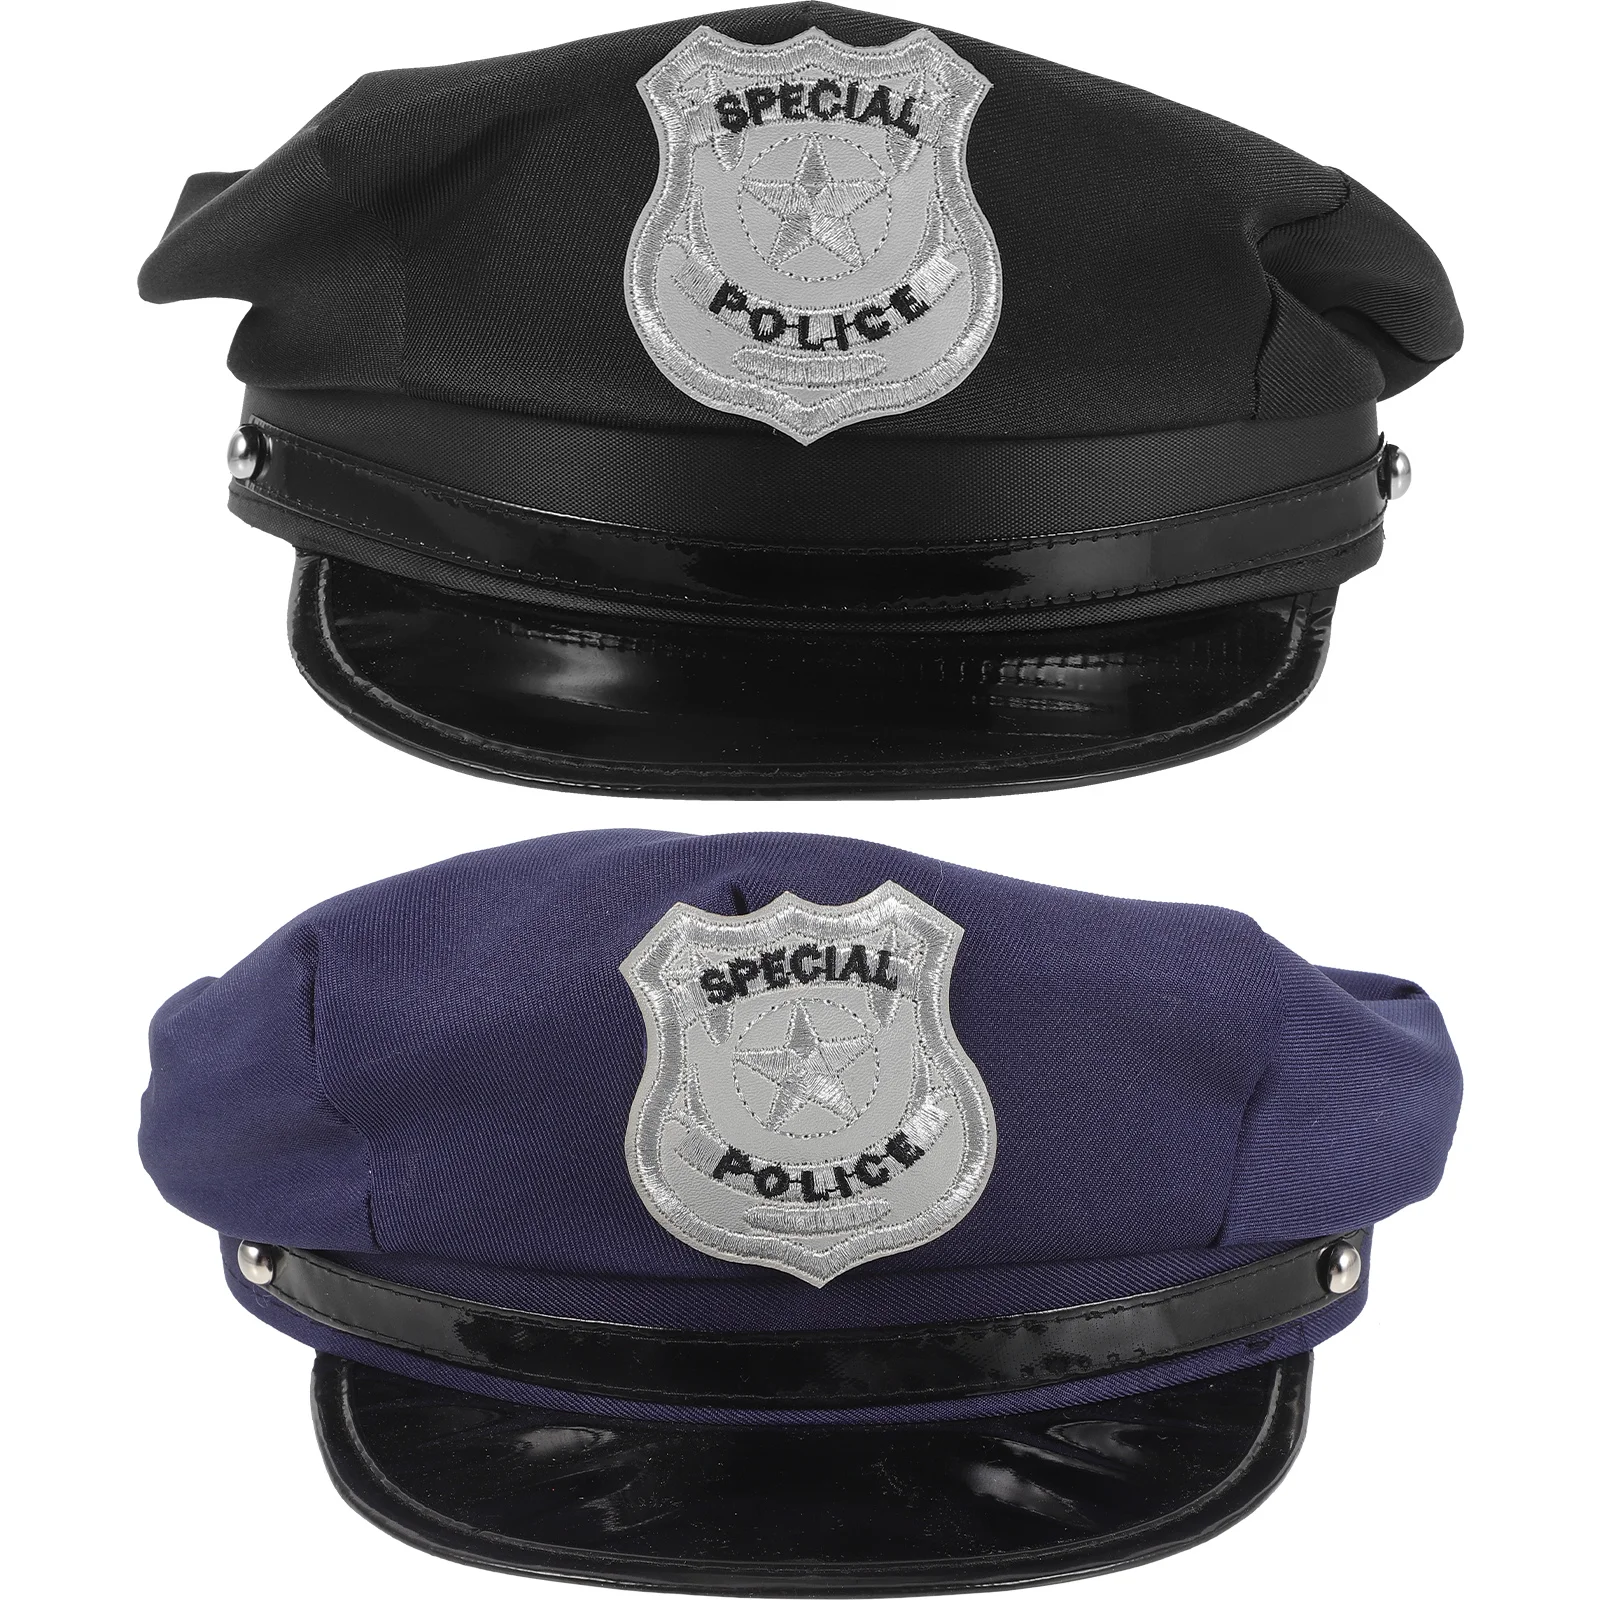 

2 Pcs Kids Halloween Costume Police Cap Cop Hat Men Stage Performance Party Favor Captain Accessories Twill Fabric Miss